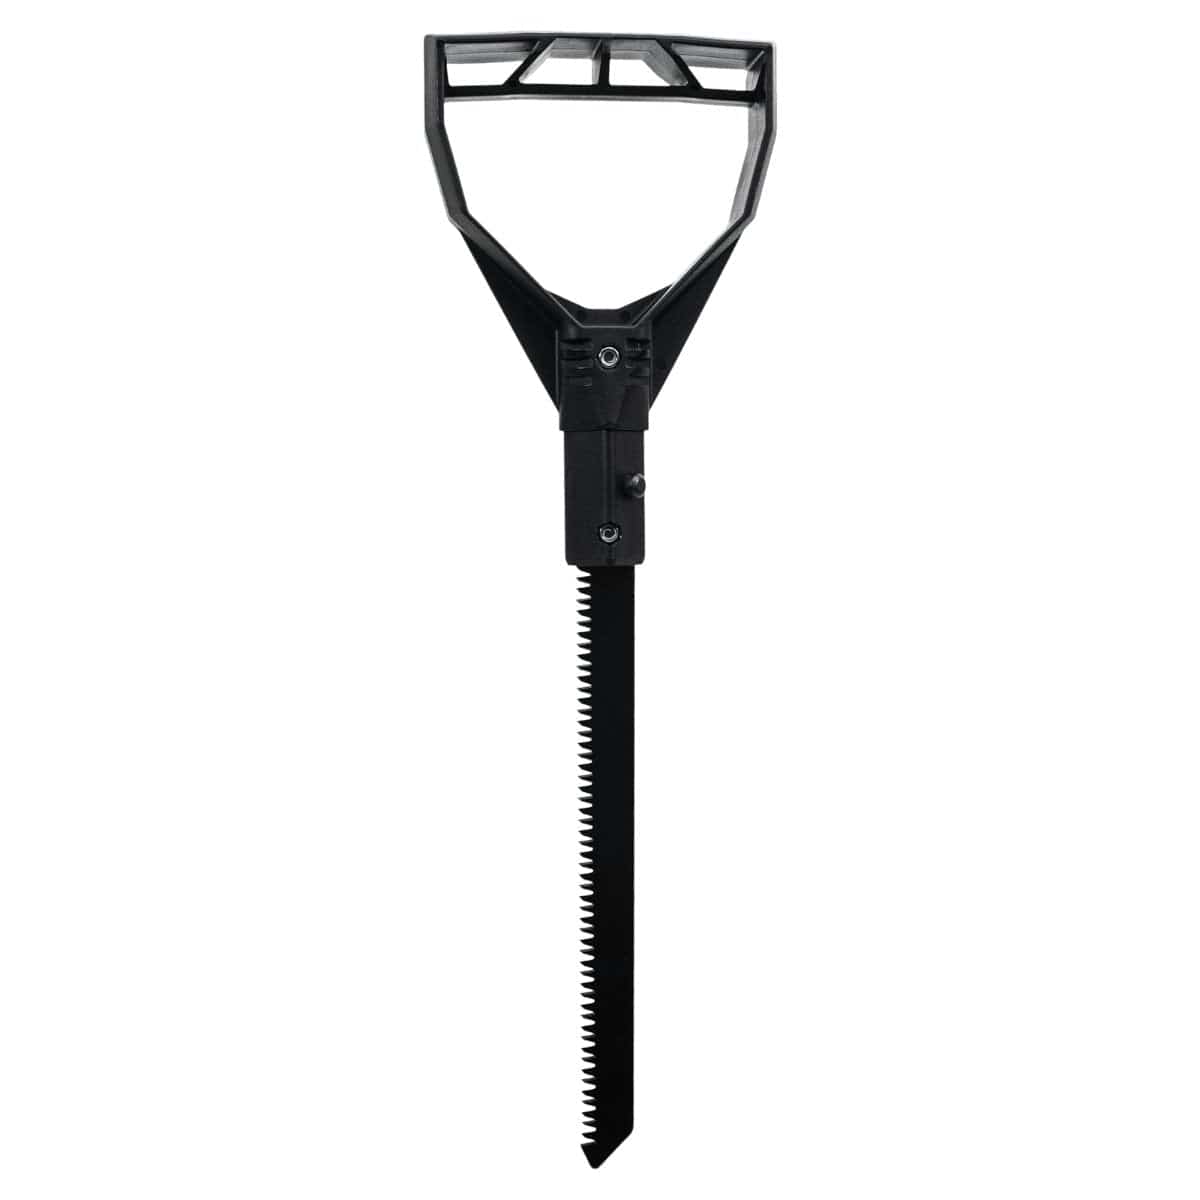 Saw &amp; handle replacement for shovel - Factory Recreation